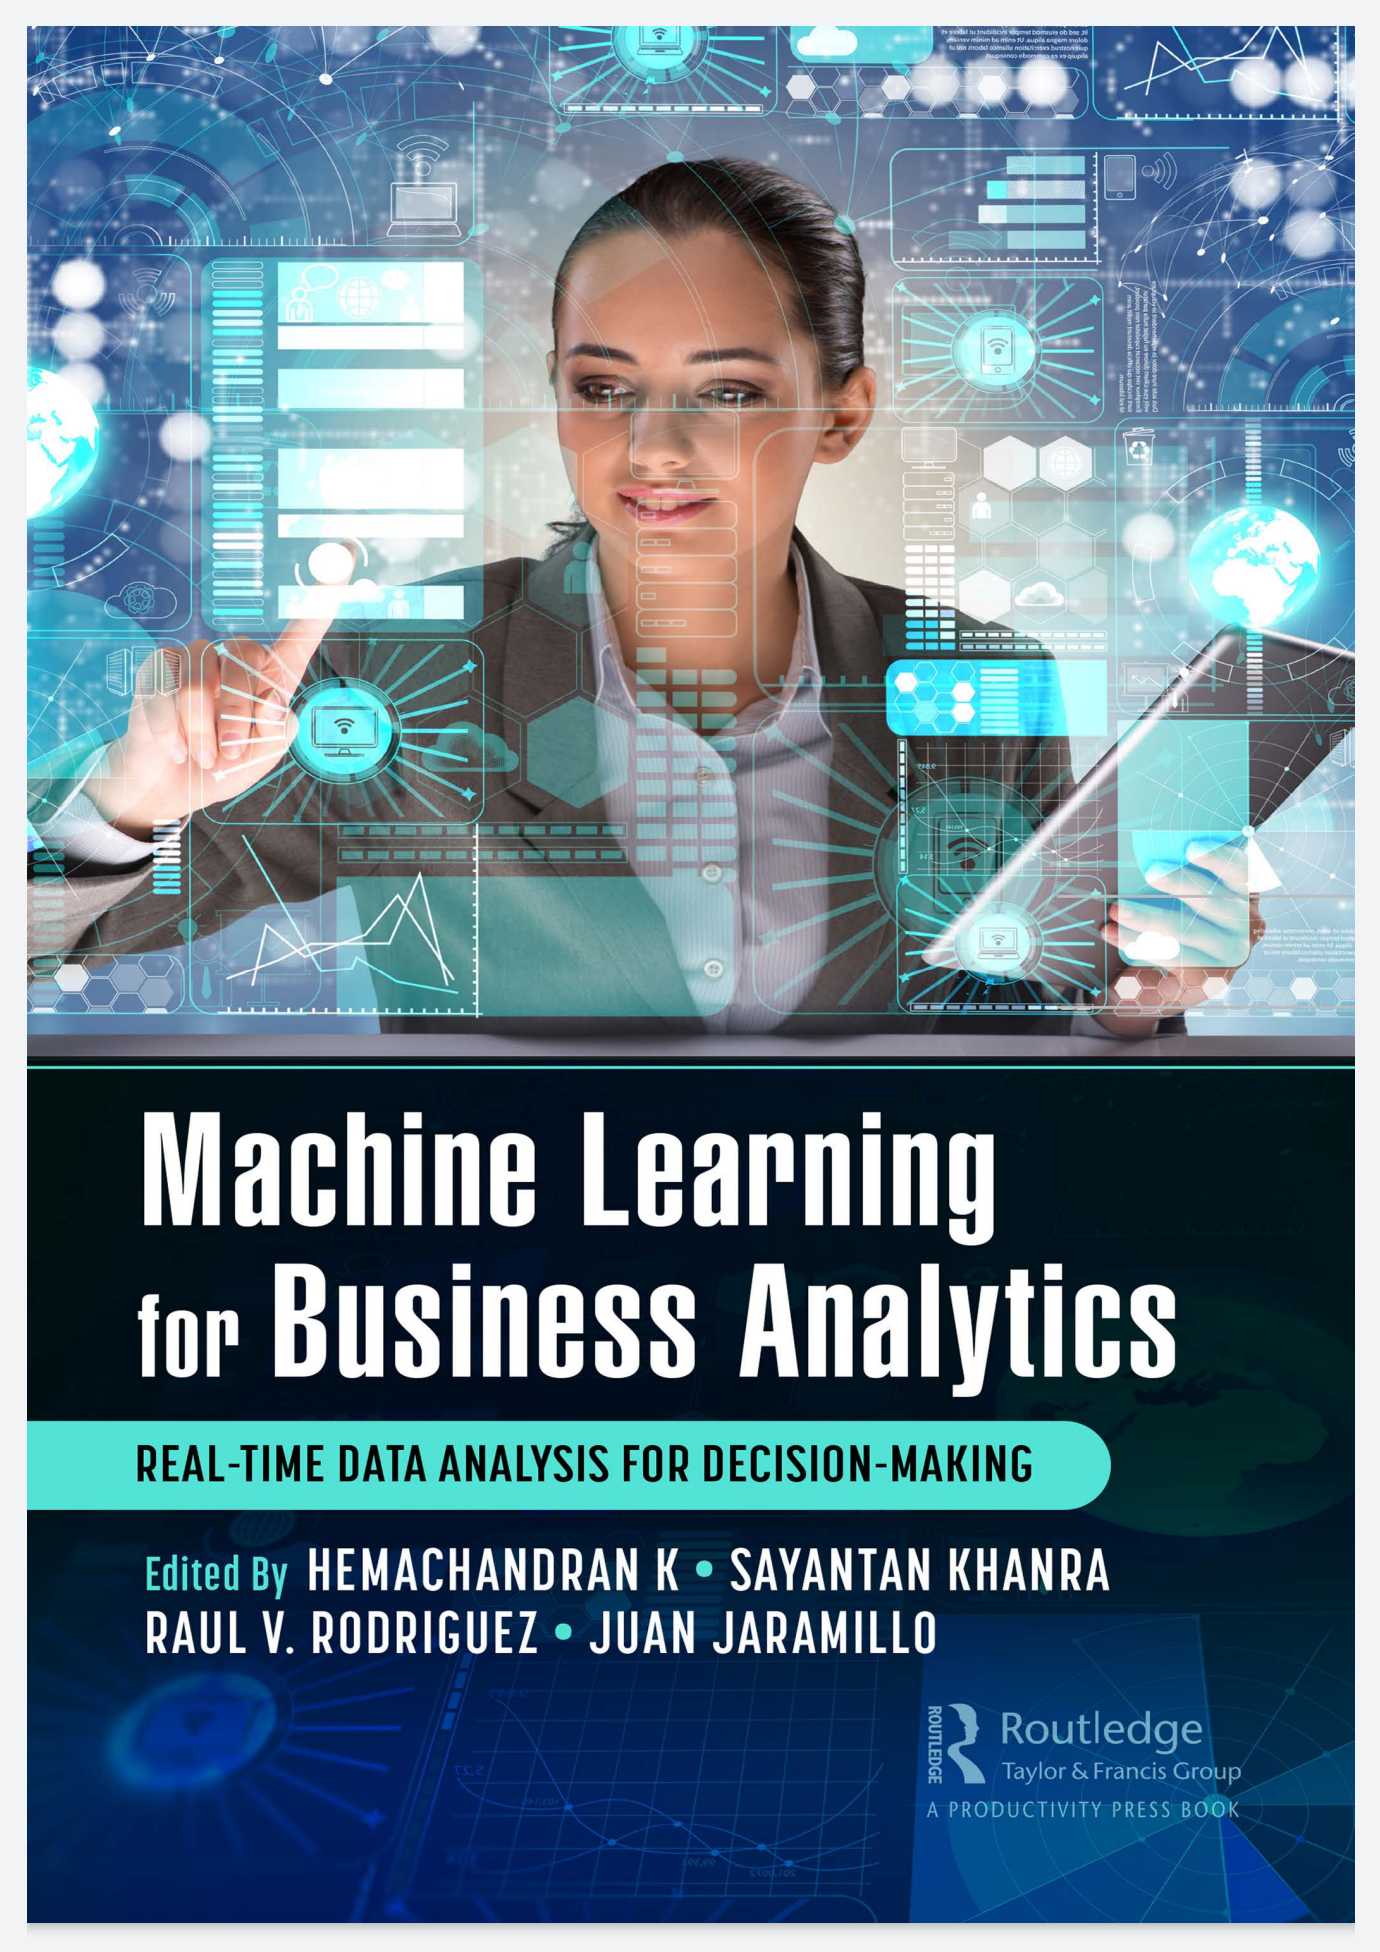 Machine Learning for Business Analytics: Real-Time Data Analysis for Decision-Making PDF